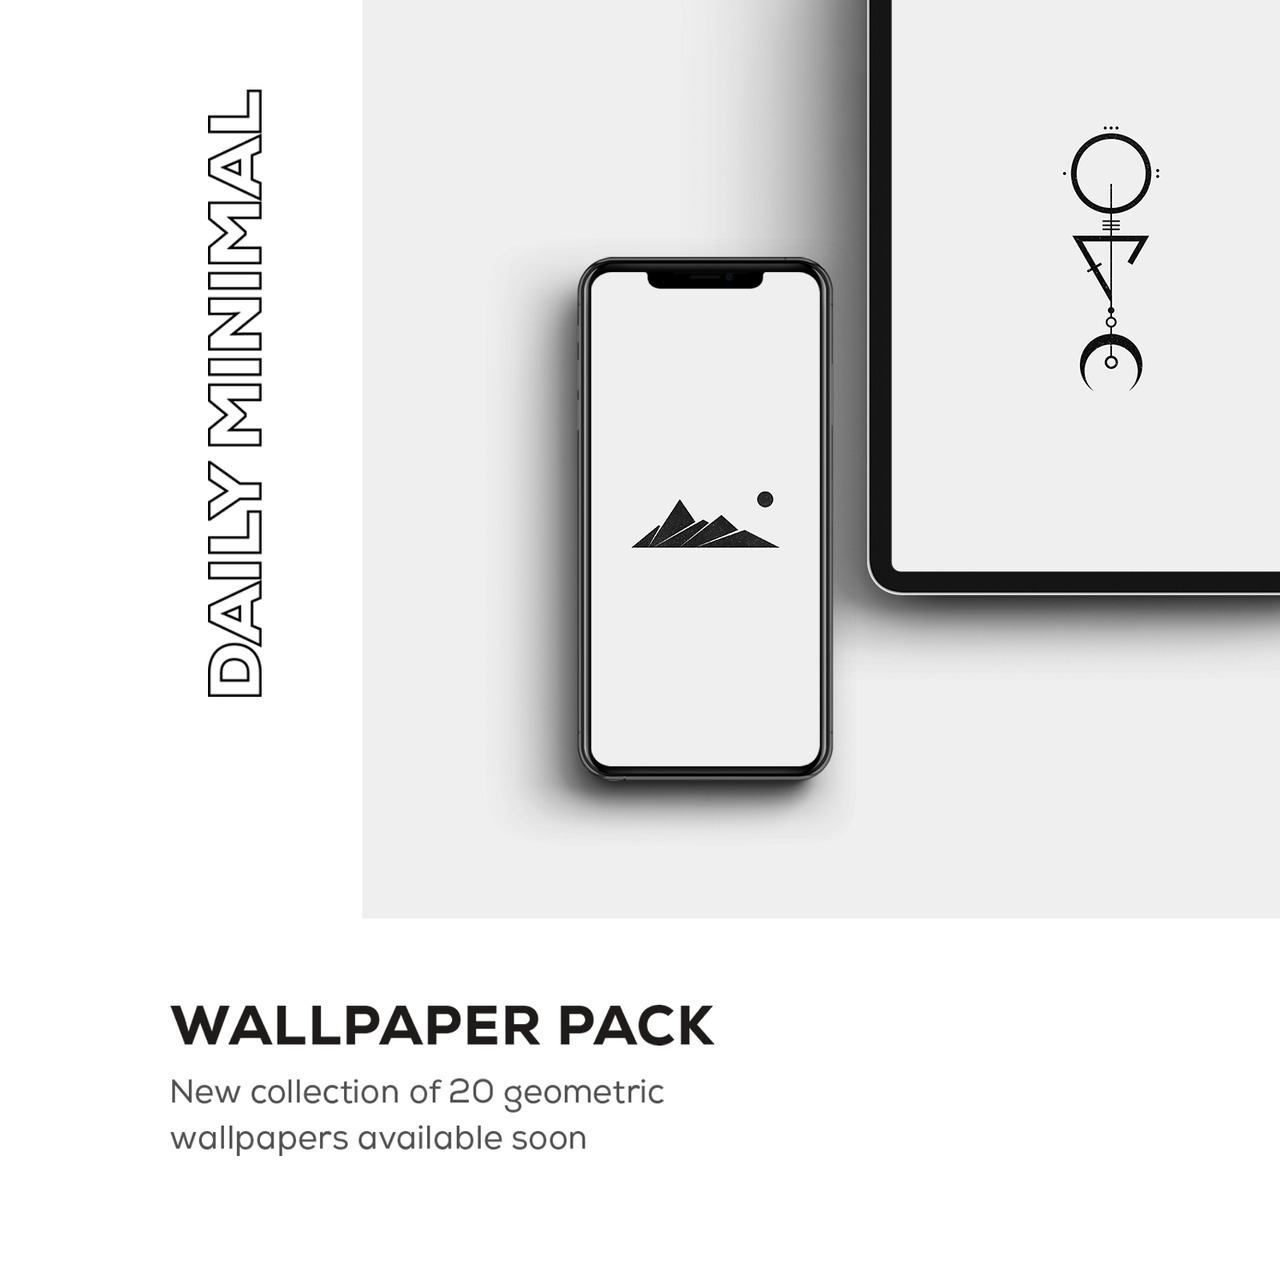 20 New Wallpapers From The Latest Daily Minimal Designs - Mobile Phone - HD Wallpaper 